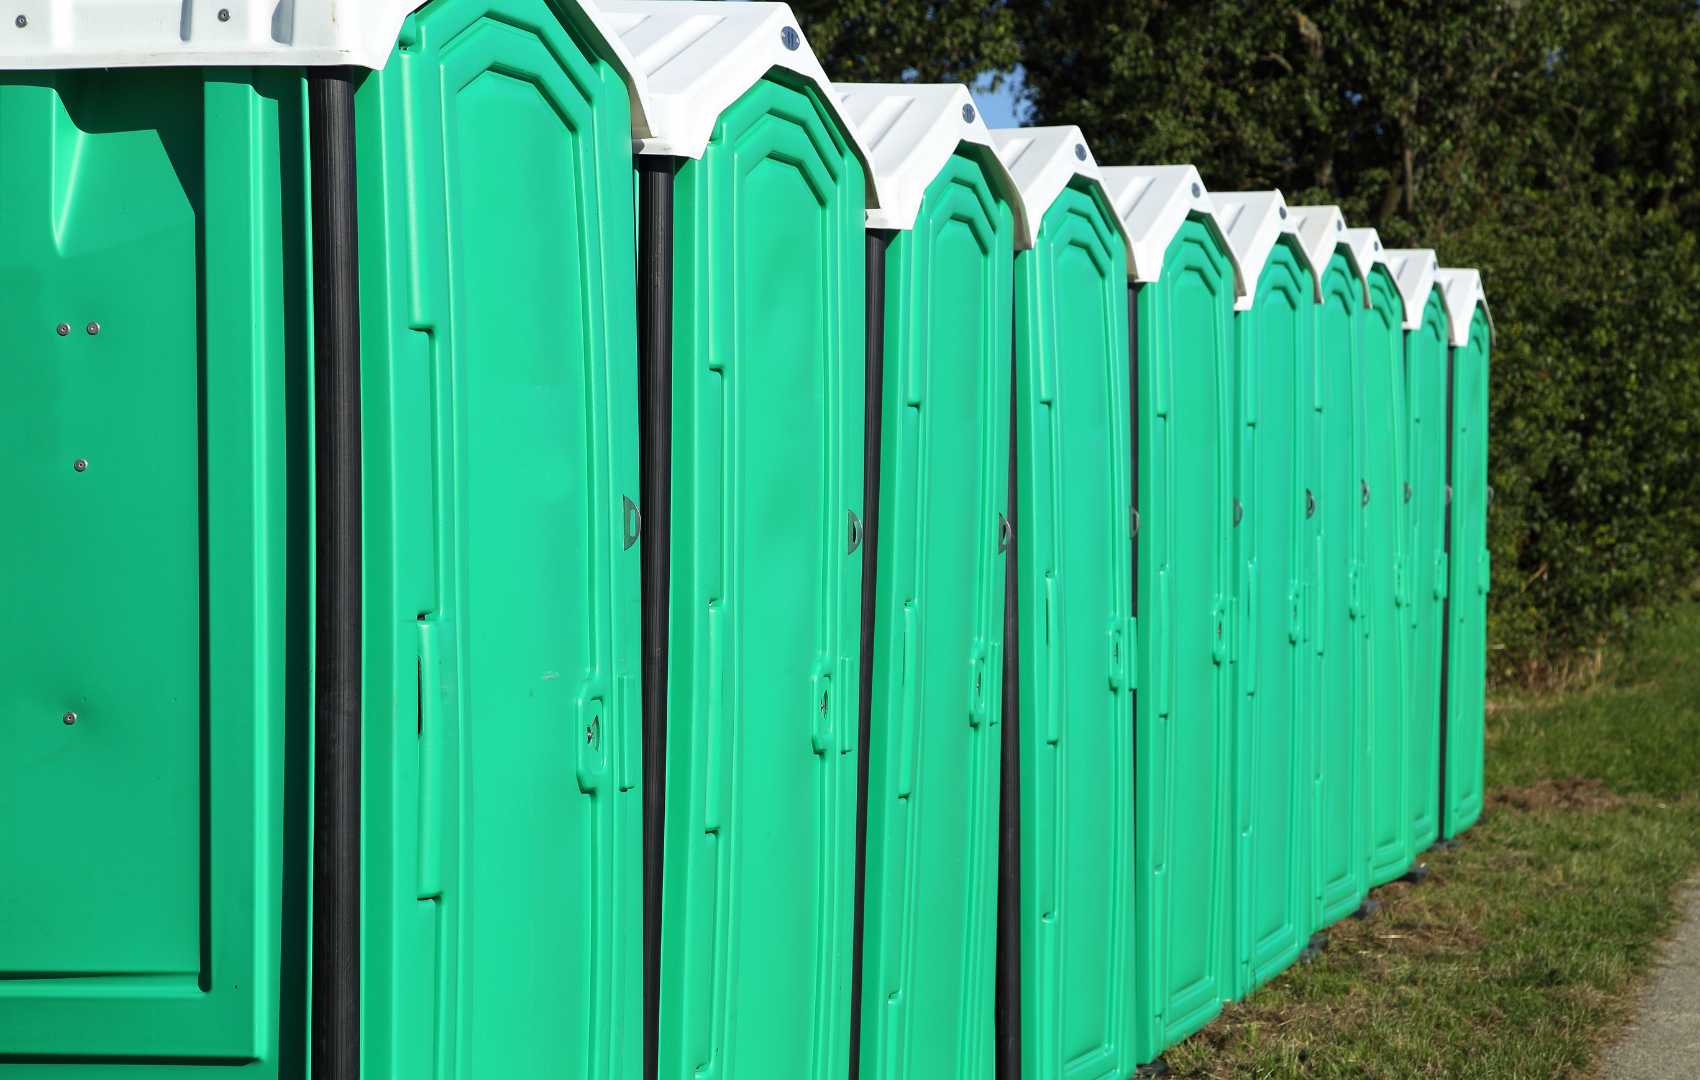 Portable toilets in a row at a site